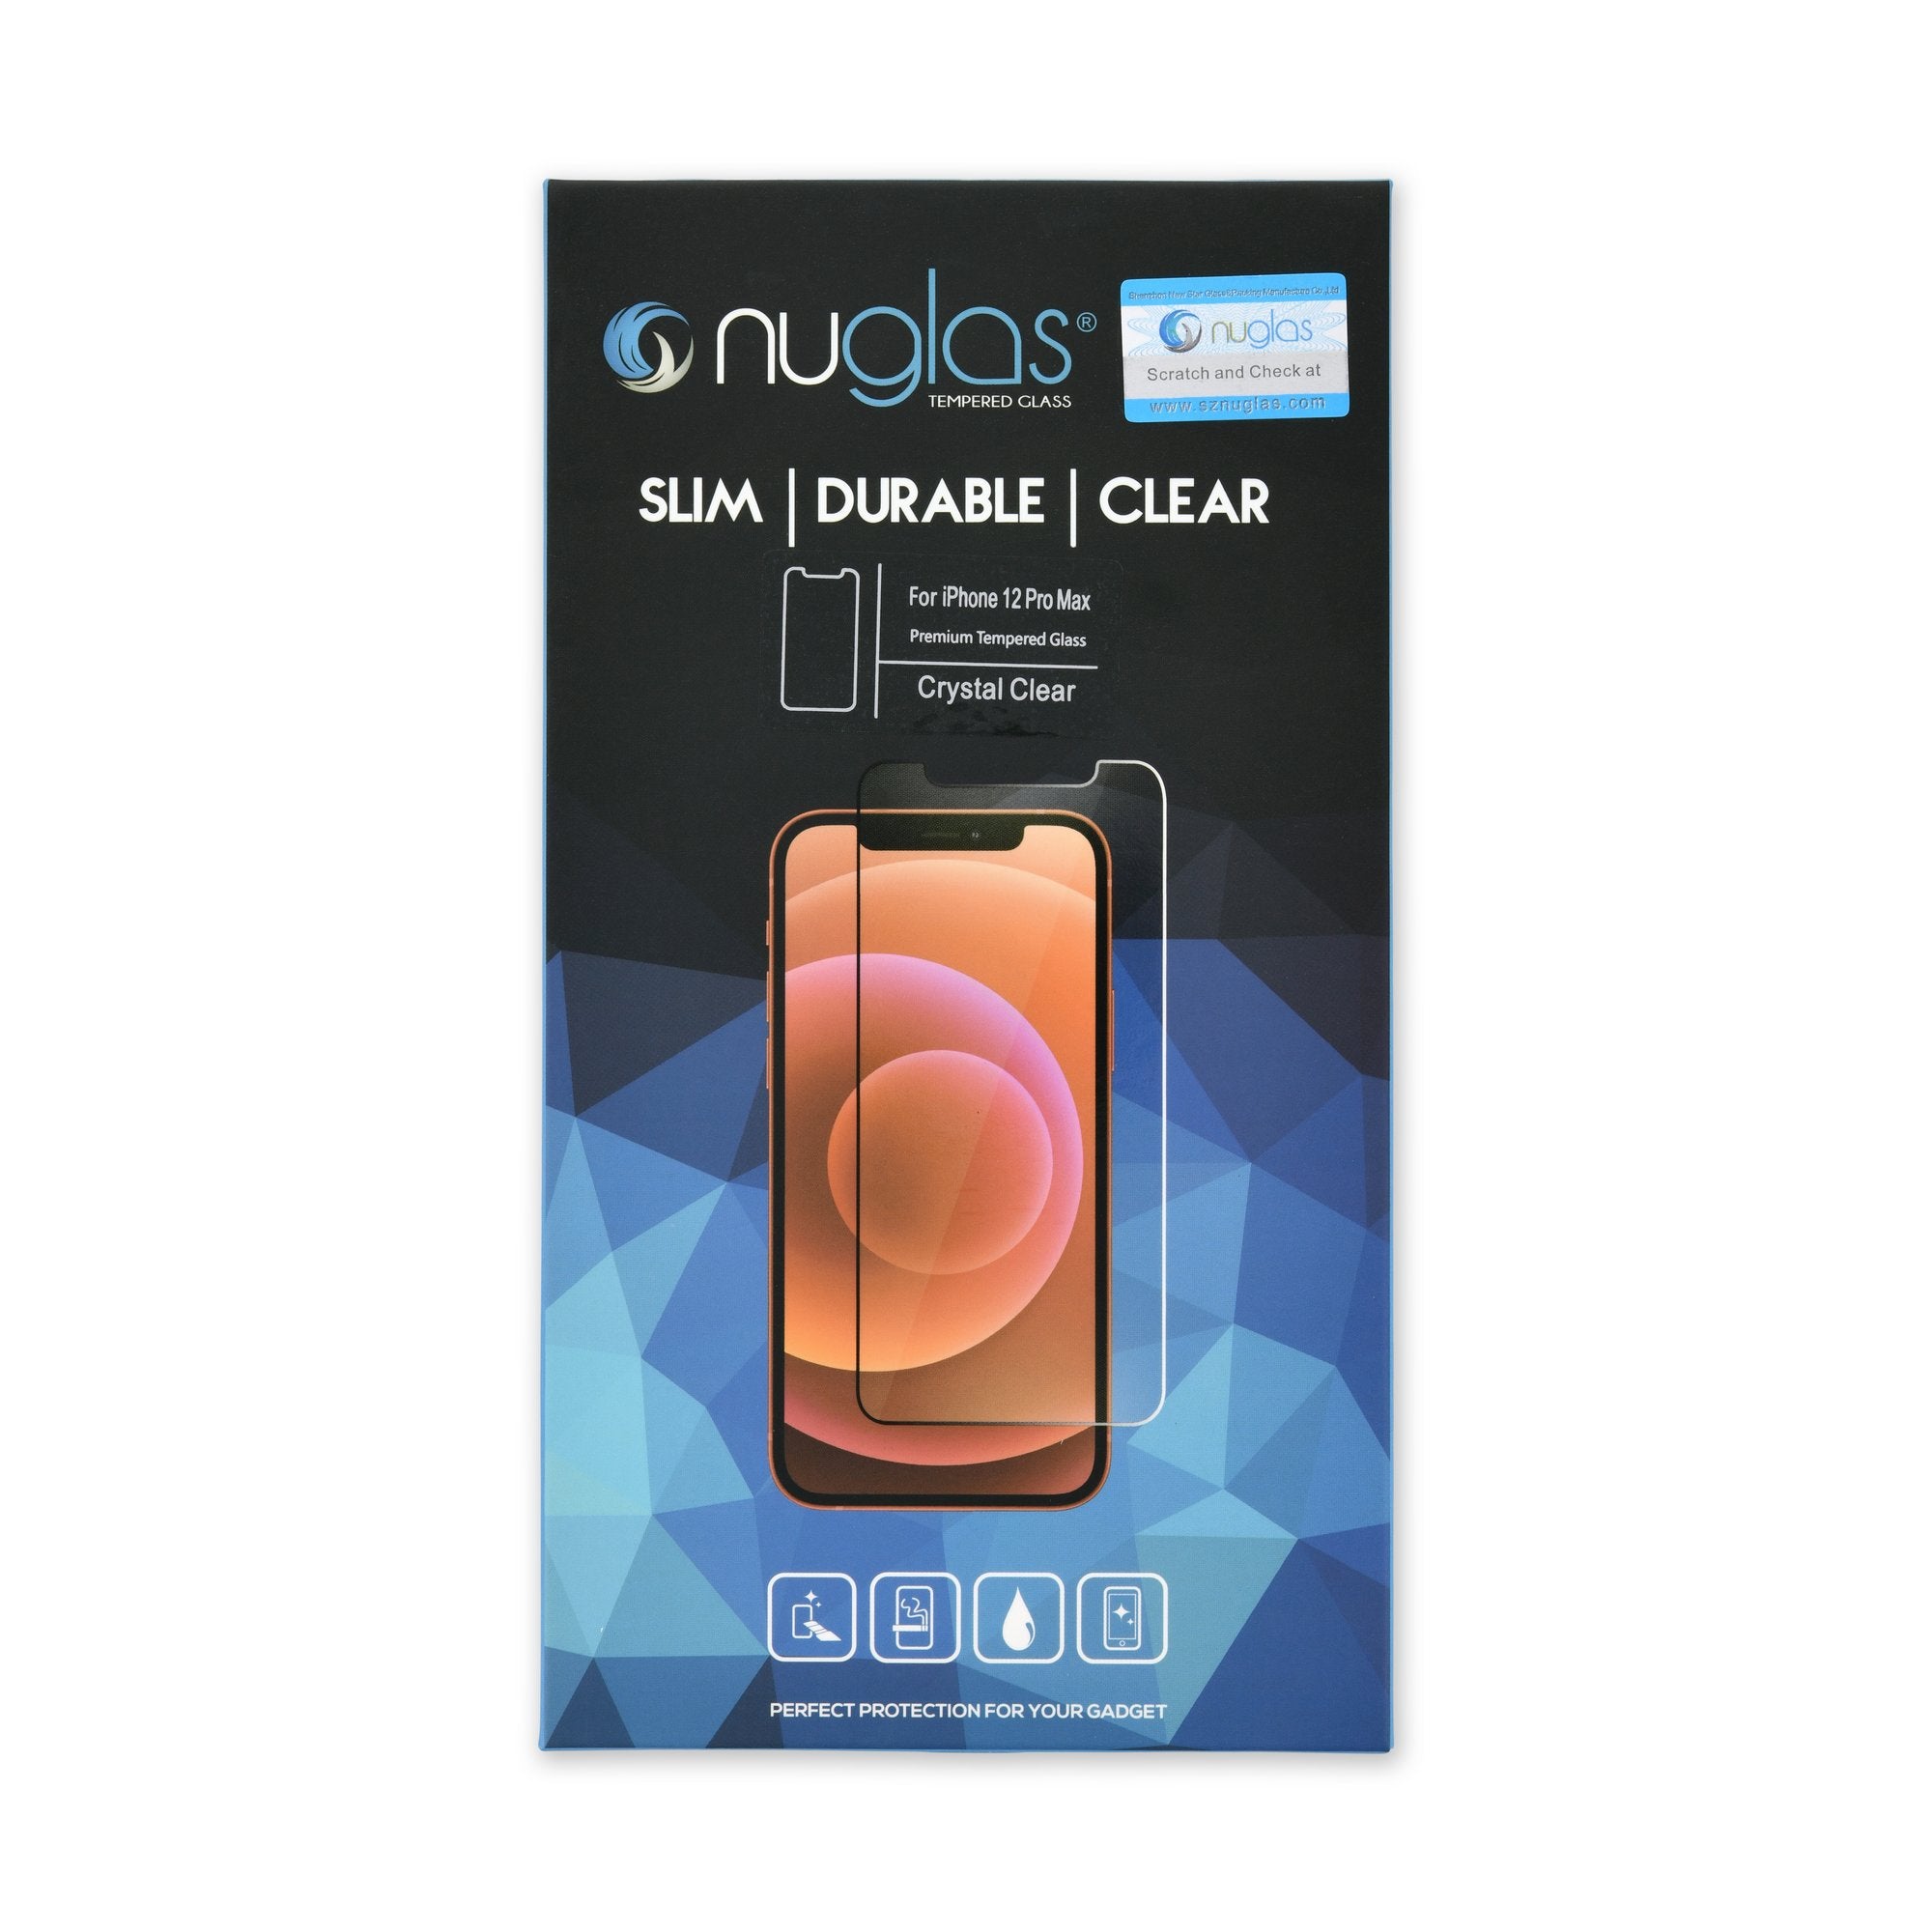 NuGlas Tempered Glass Screen Protector for iPhone 12 Pro Max New